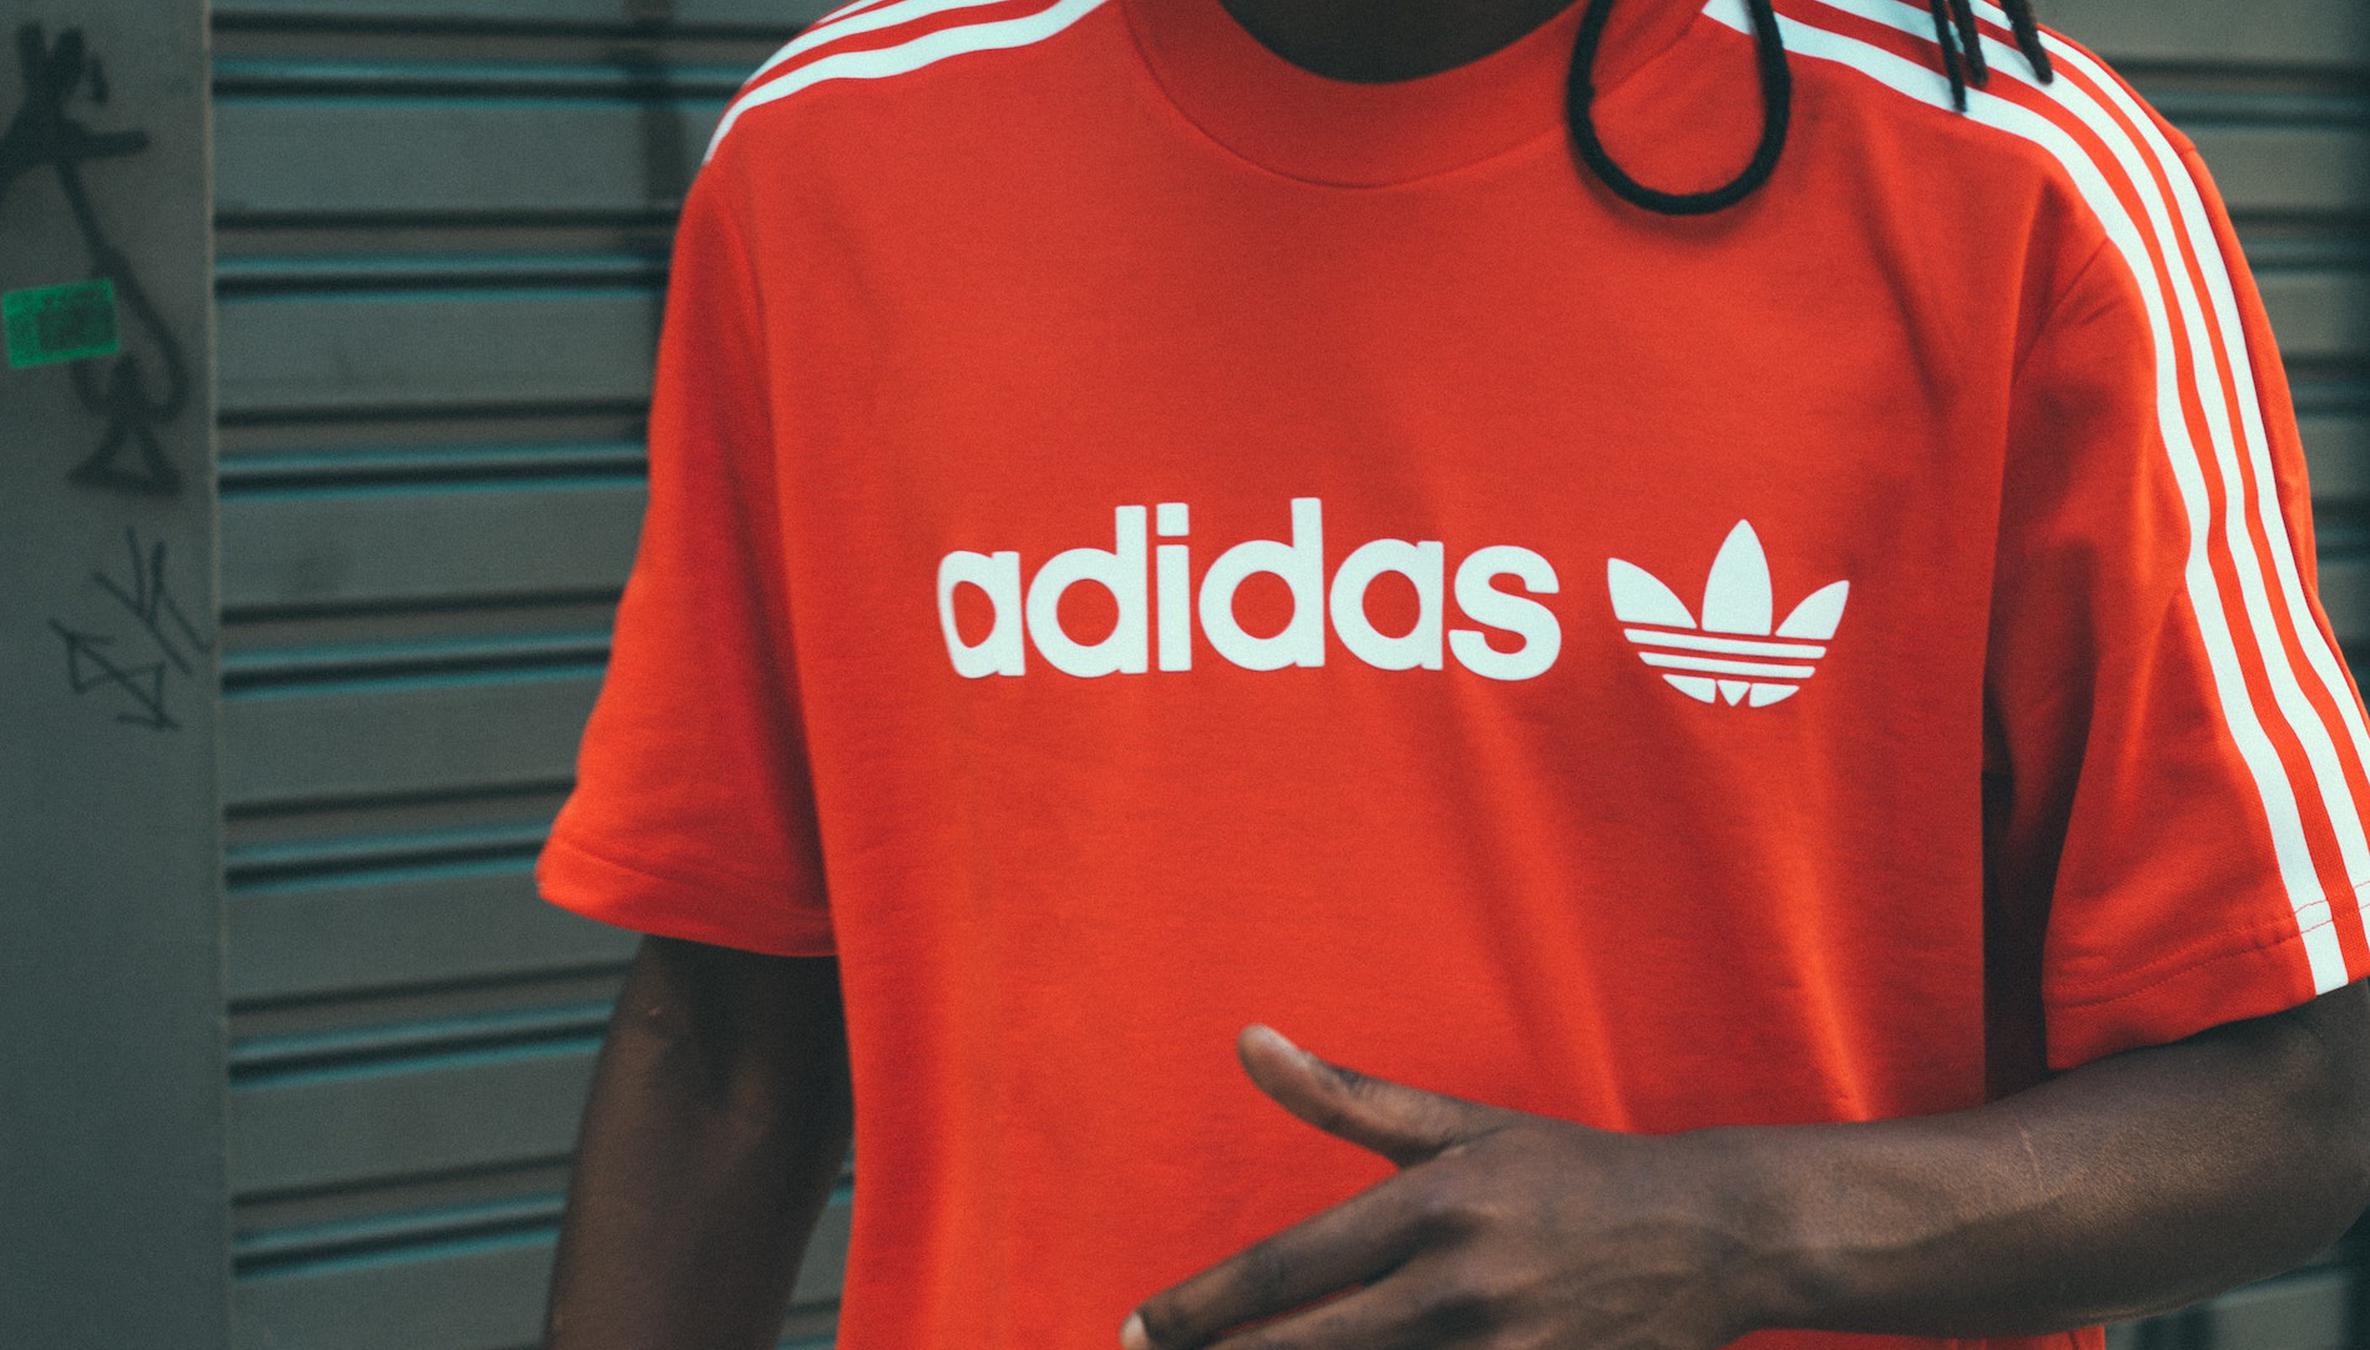 Earn $1500 in a Diverse Adidas + 3 More Backstage